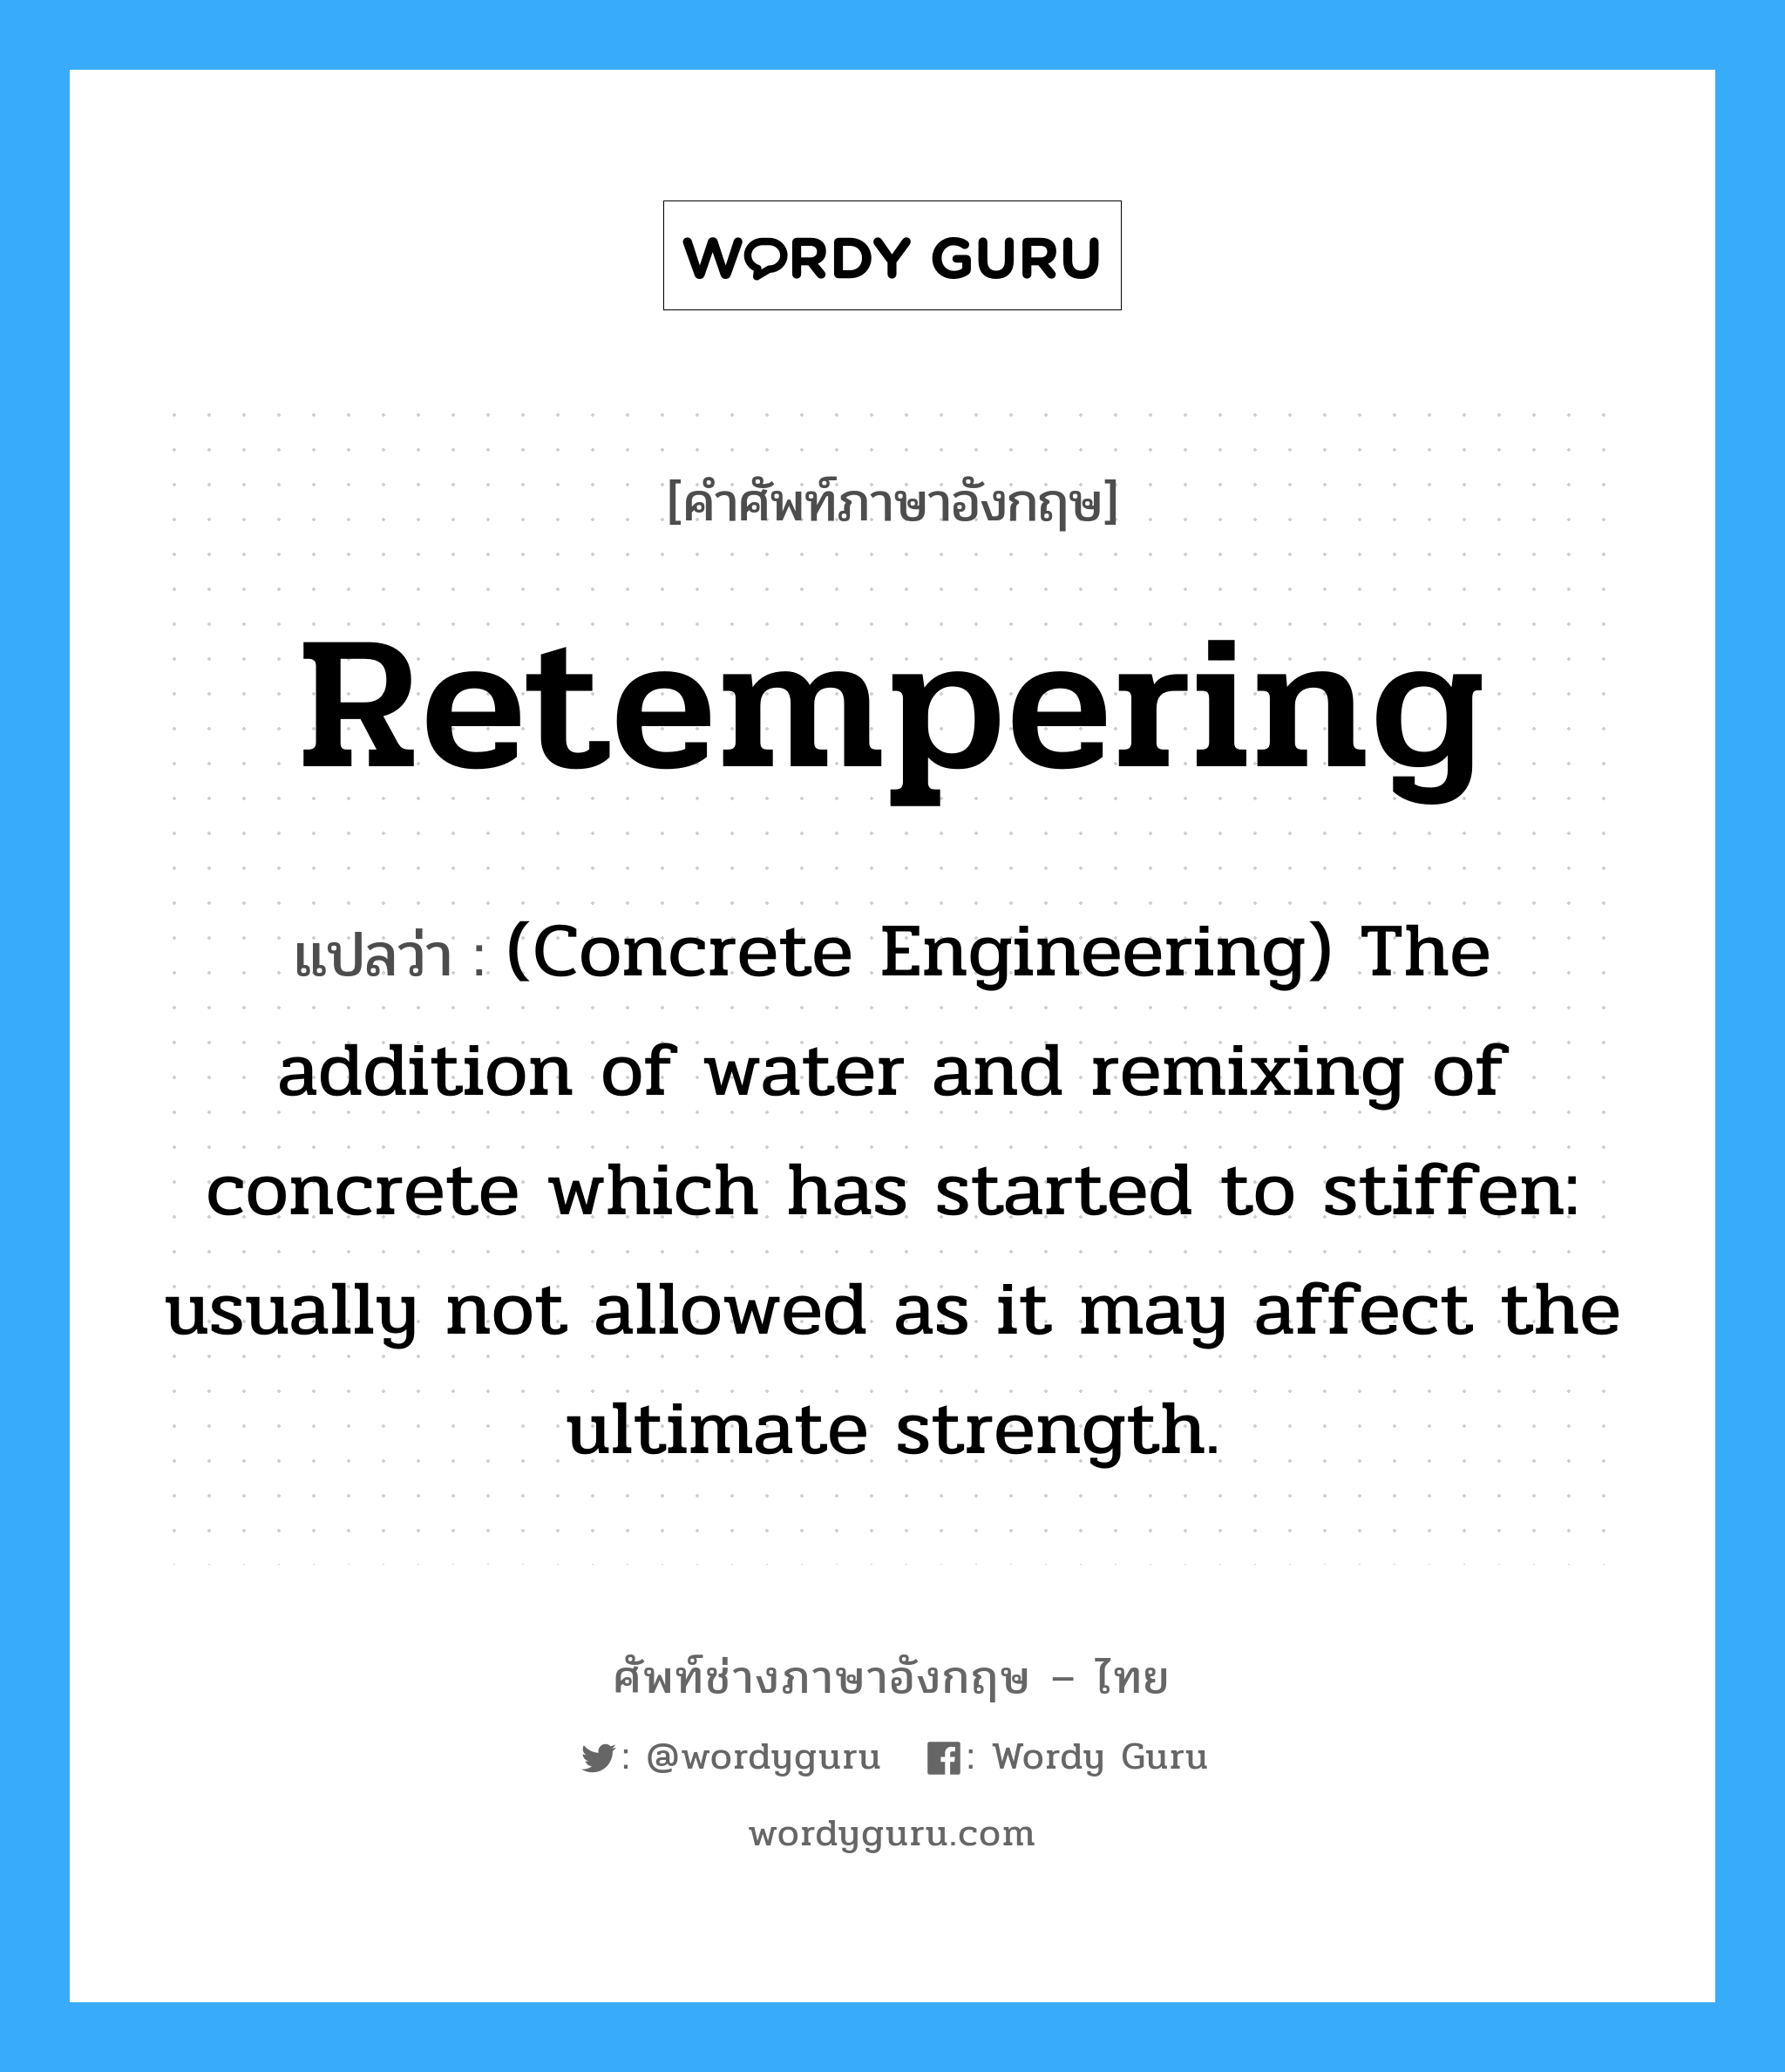 Retempering แปลว่า?, คำศัพท์ช่างภาษาอังกฤษ - ไทย Retempering คำศัพท์ภาษาอังกฤษ Retempering แปลว่า (Concrete Engineering) The addition of water and remixing of concrete which has started to stiffen: usually not allowed as it may affect the ultimate strength.